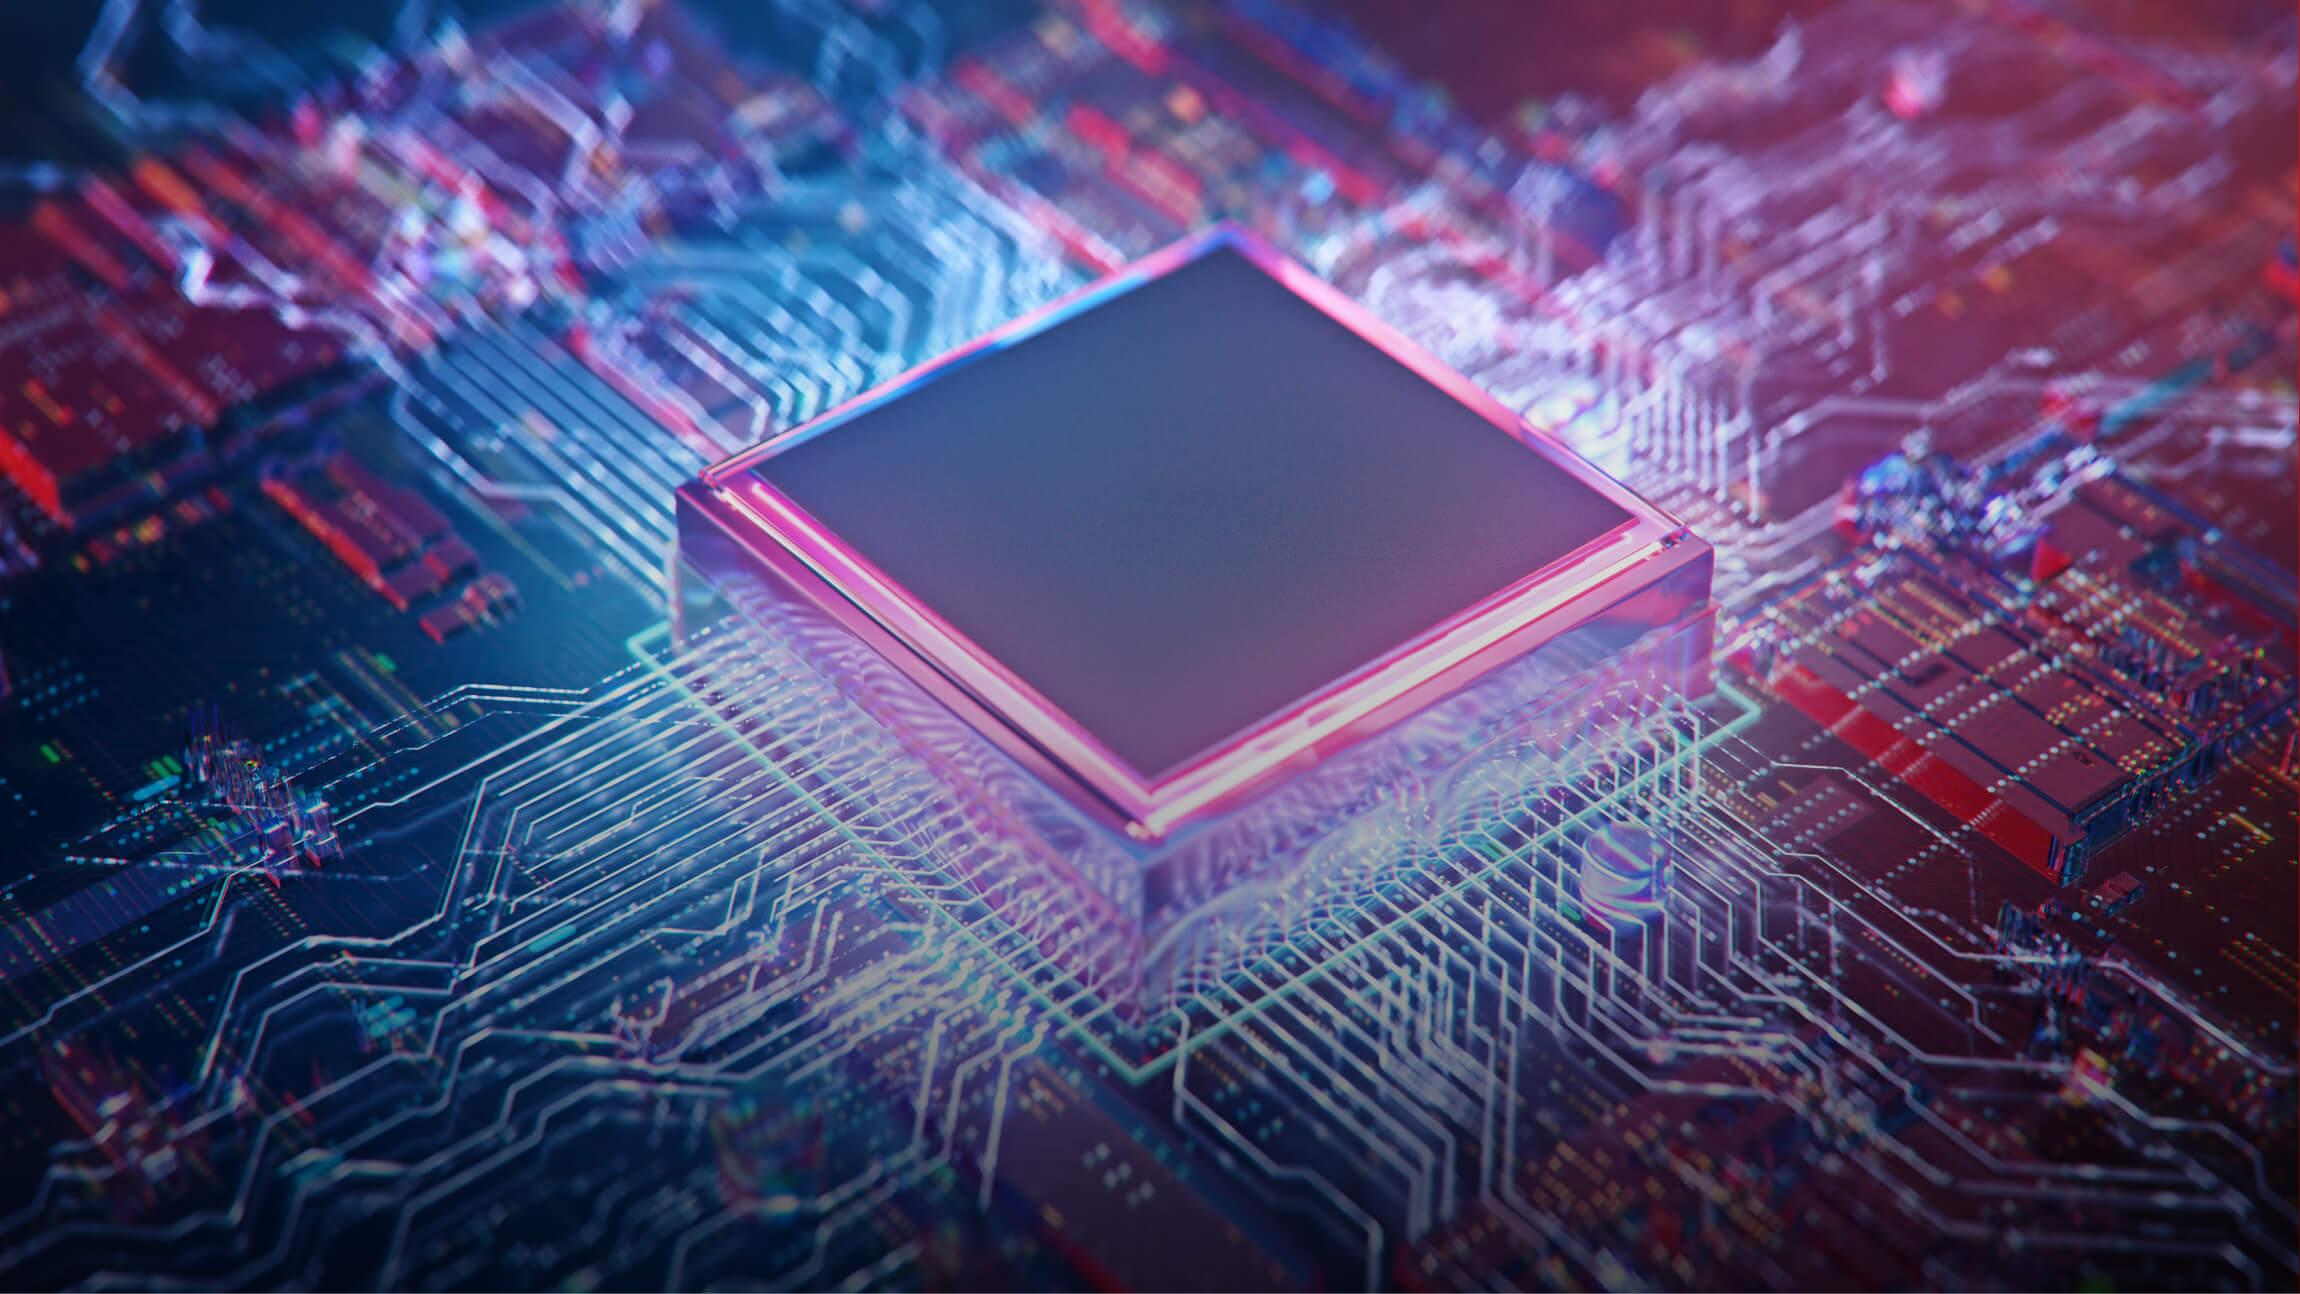 Image of a computer chip